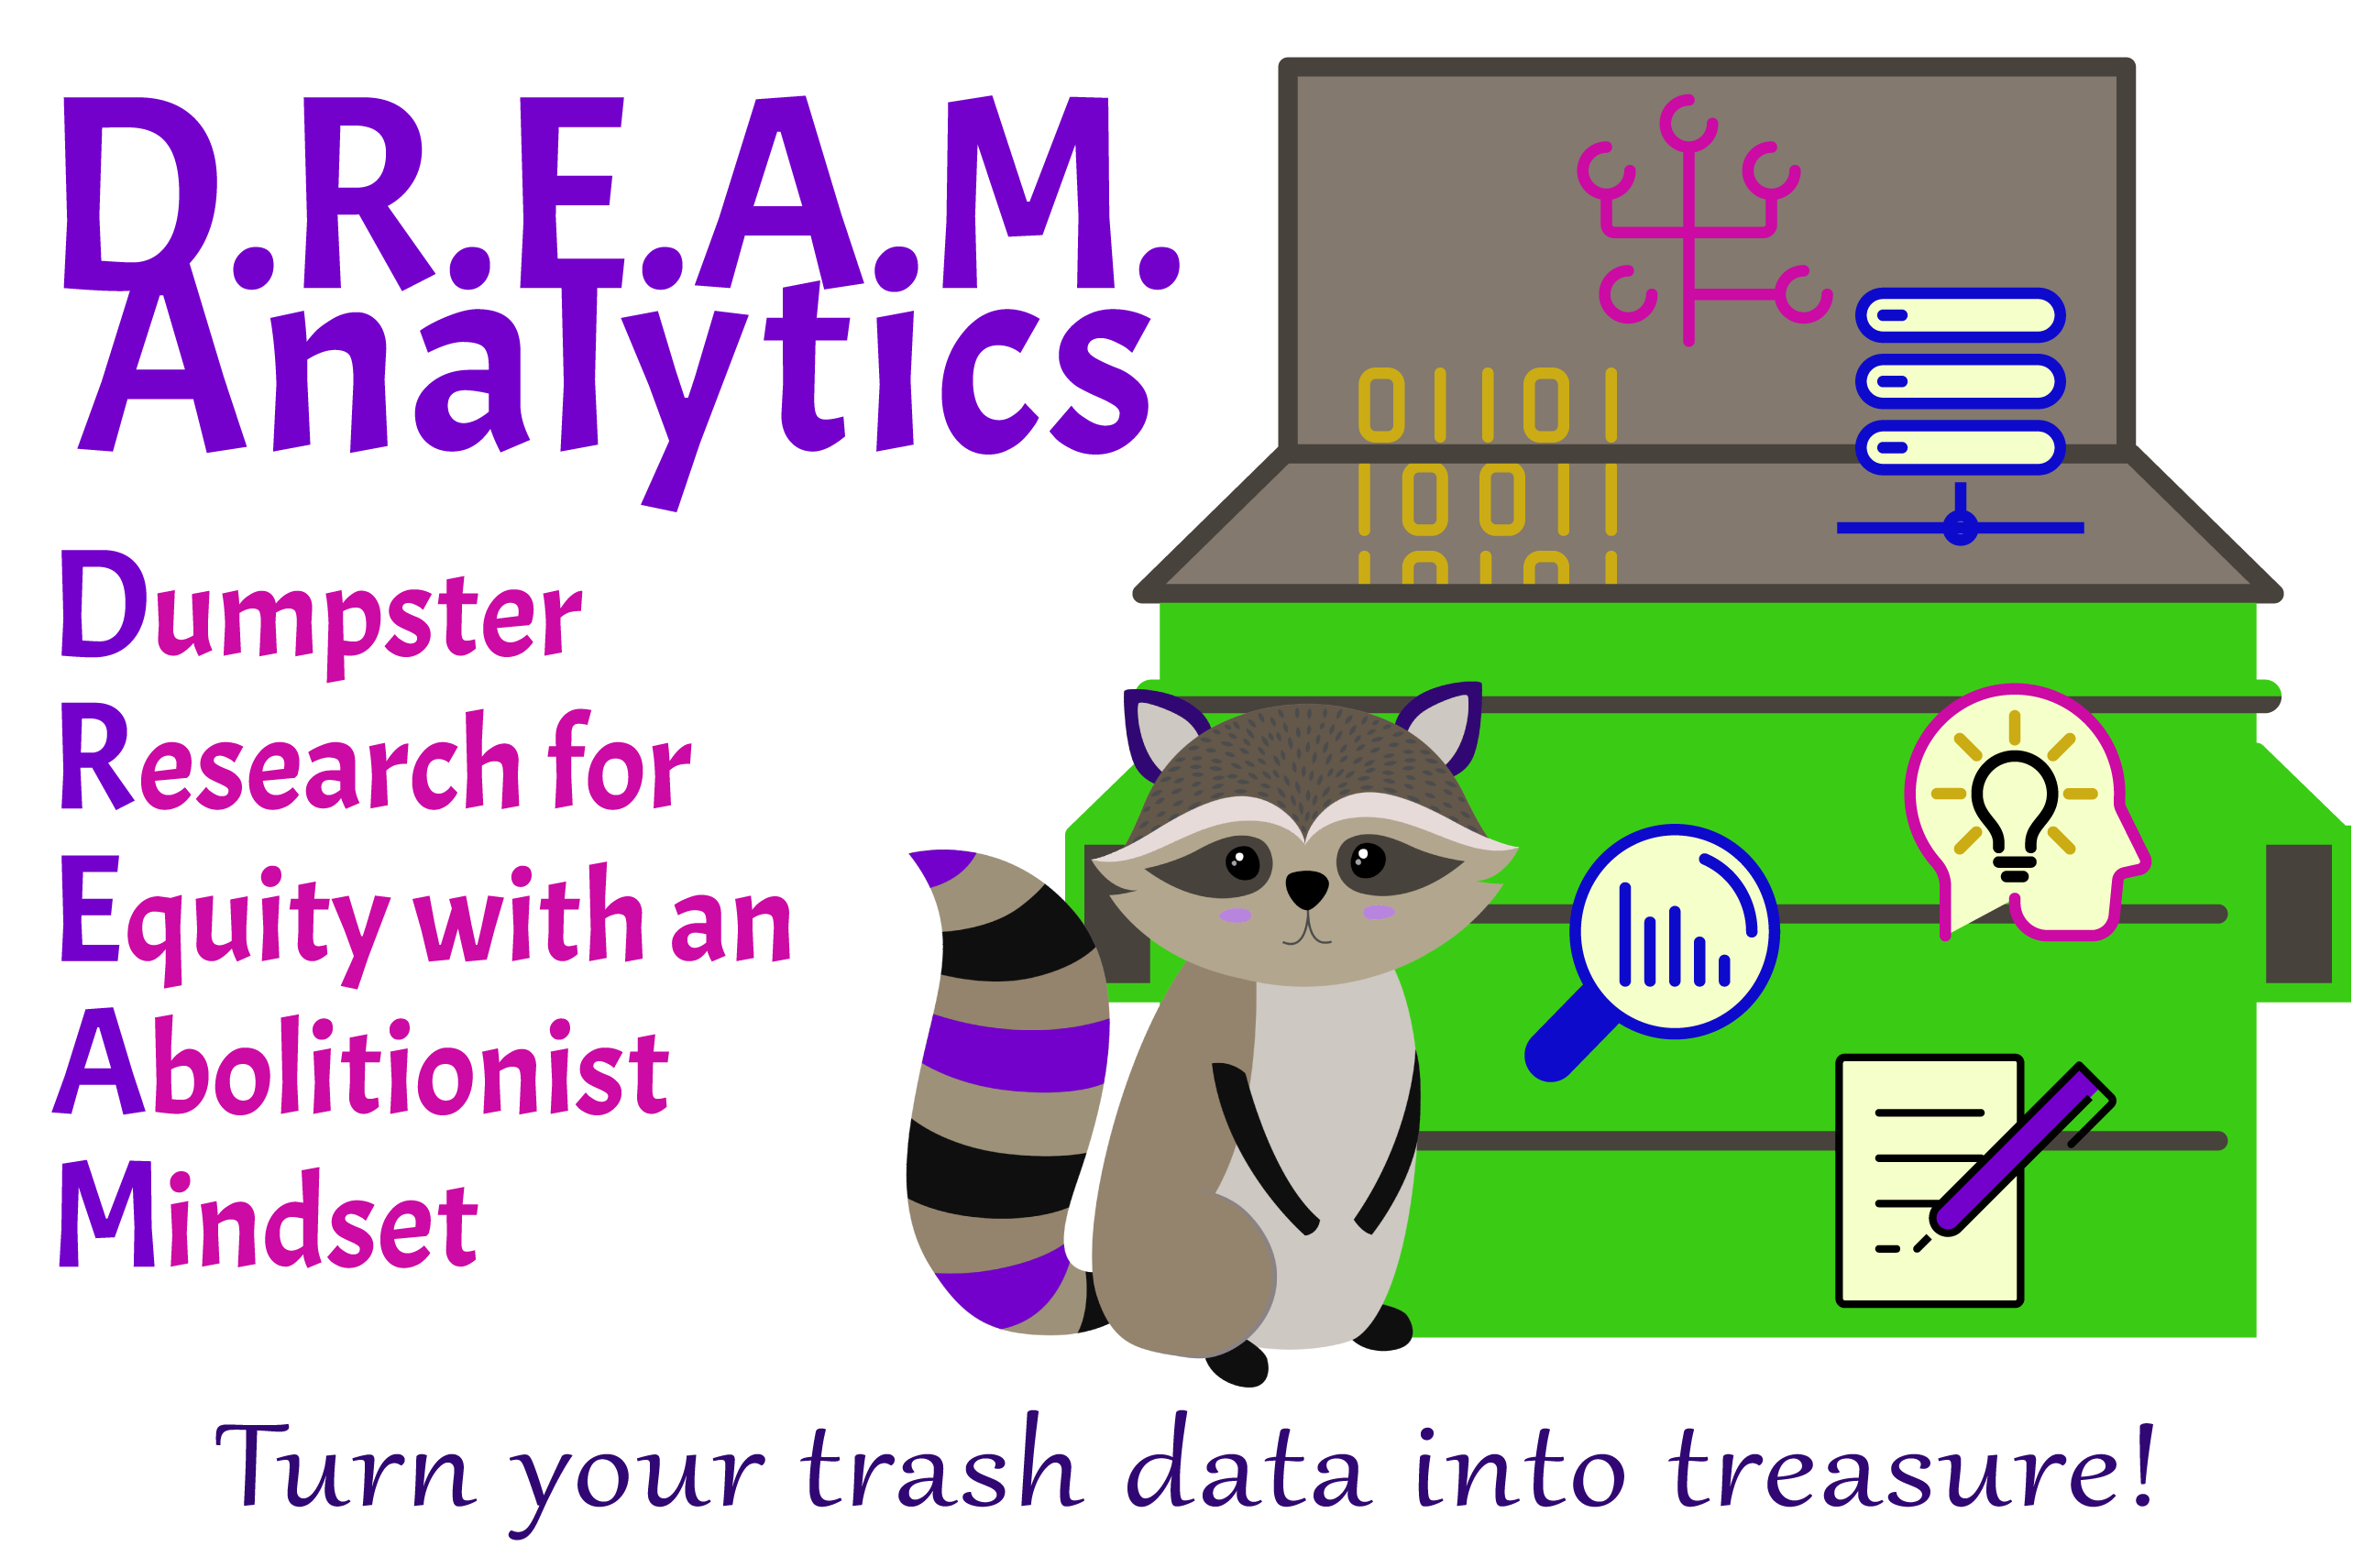 D.R.E.A.M. Analytics Dumpster Research for Equity with an Abolitionist Mindset, an image of a raccoon next to a dumpster with data icons in and around it with the caption 'Turn your trash data into treasure!'